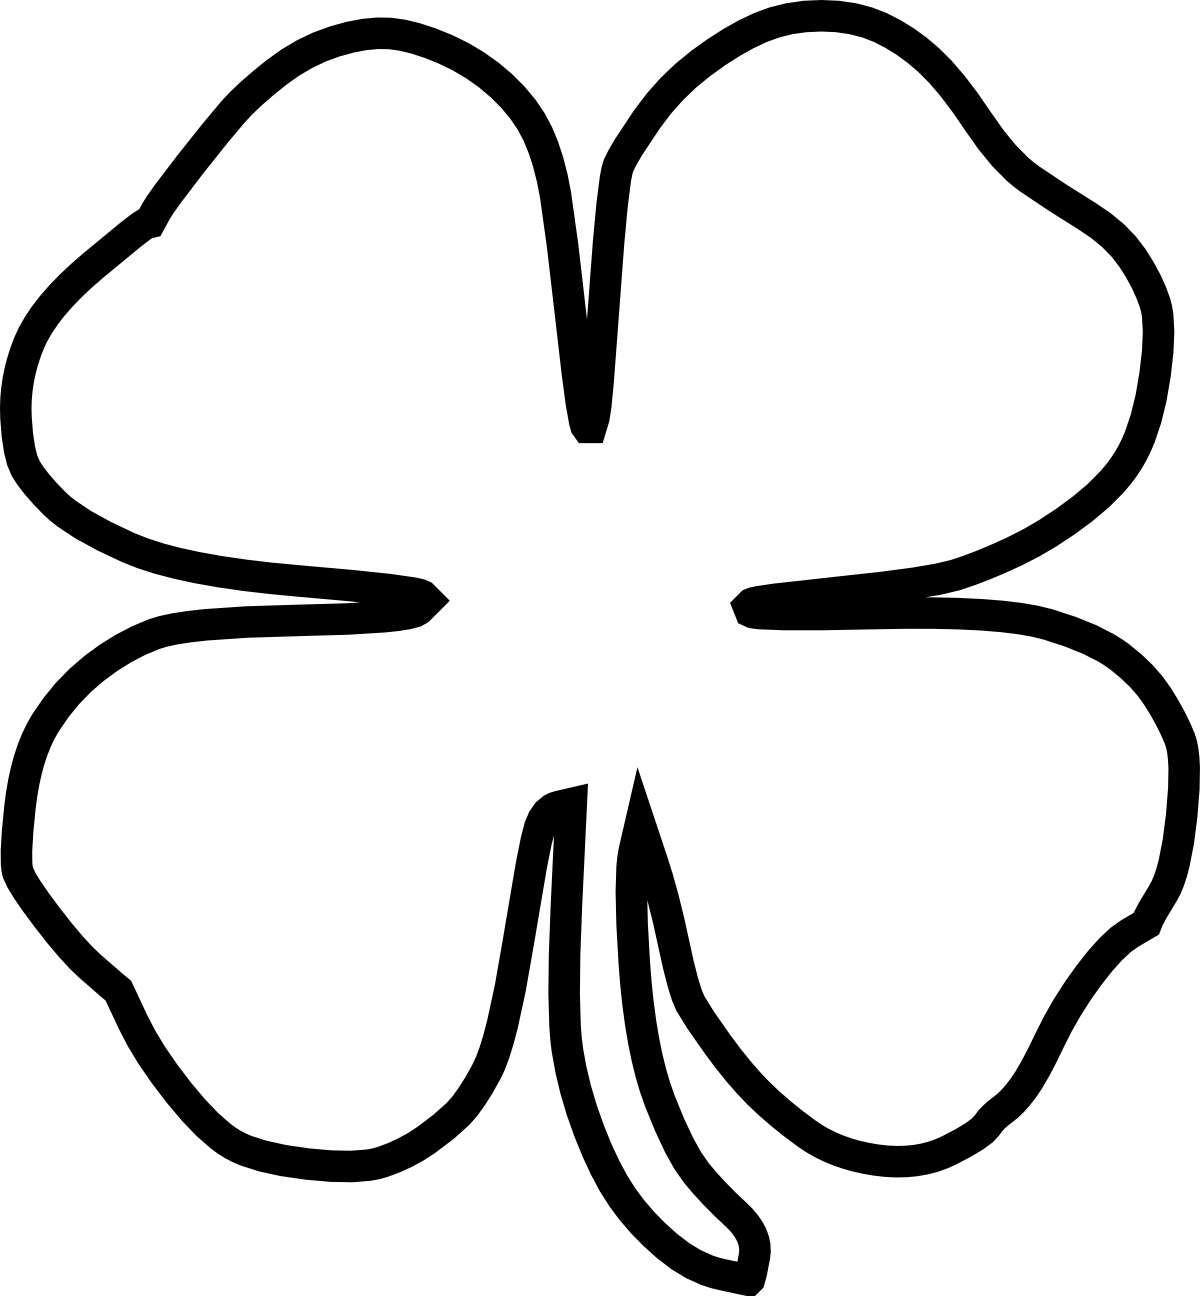 free-four-leaf-clover-clipart-download-free-four-leaf-clover-clipart